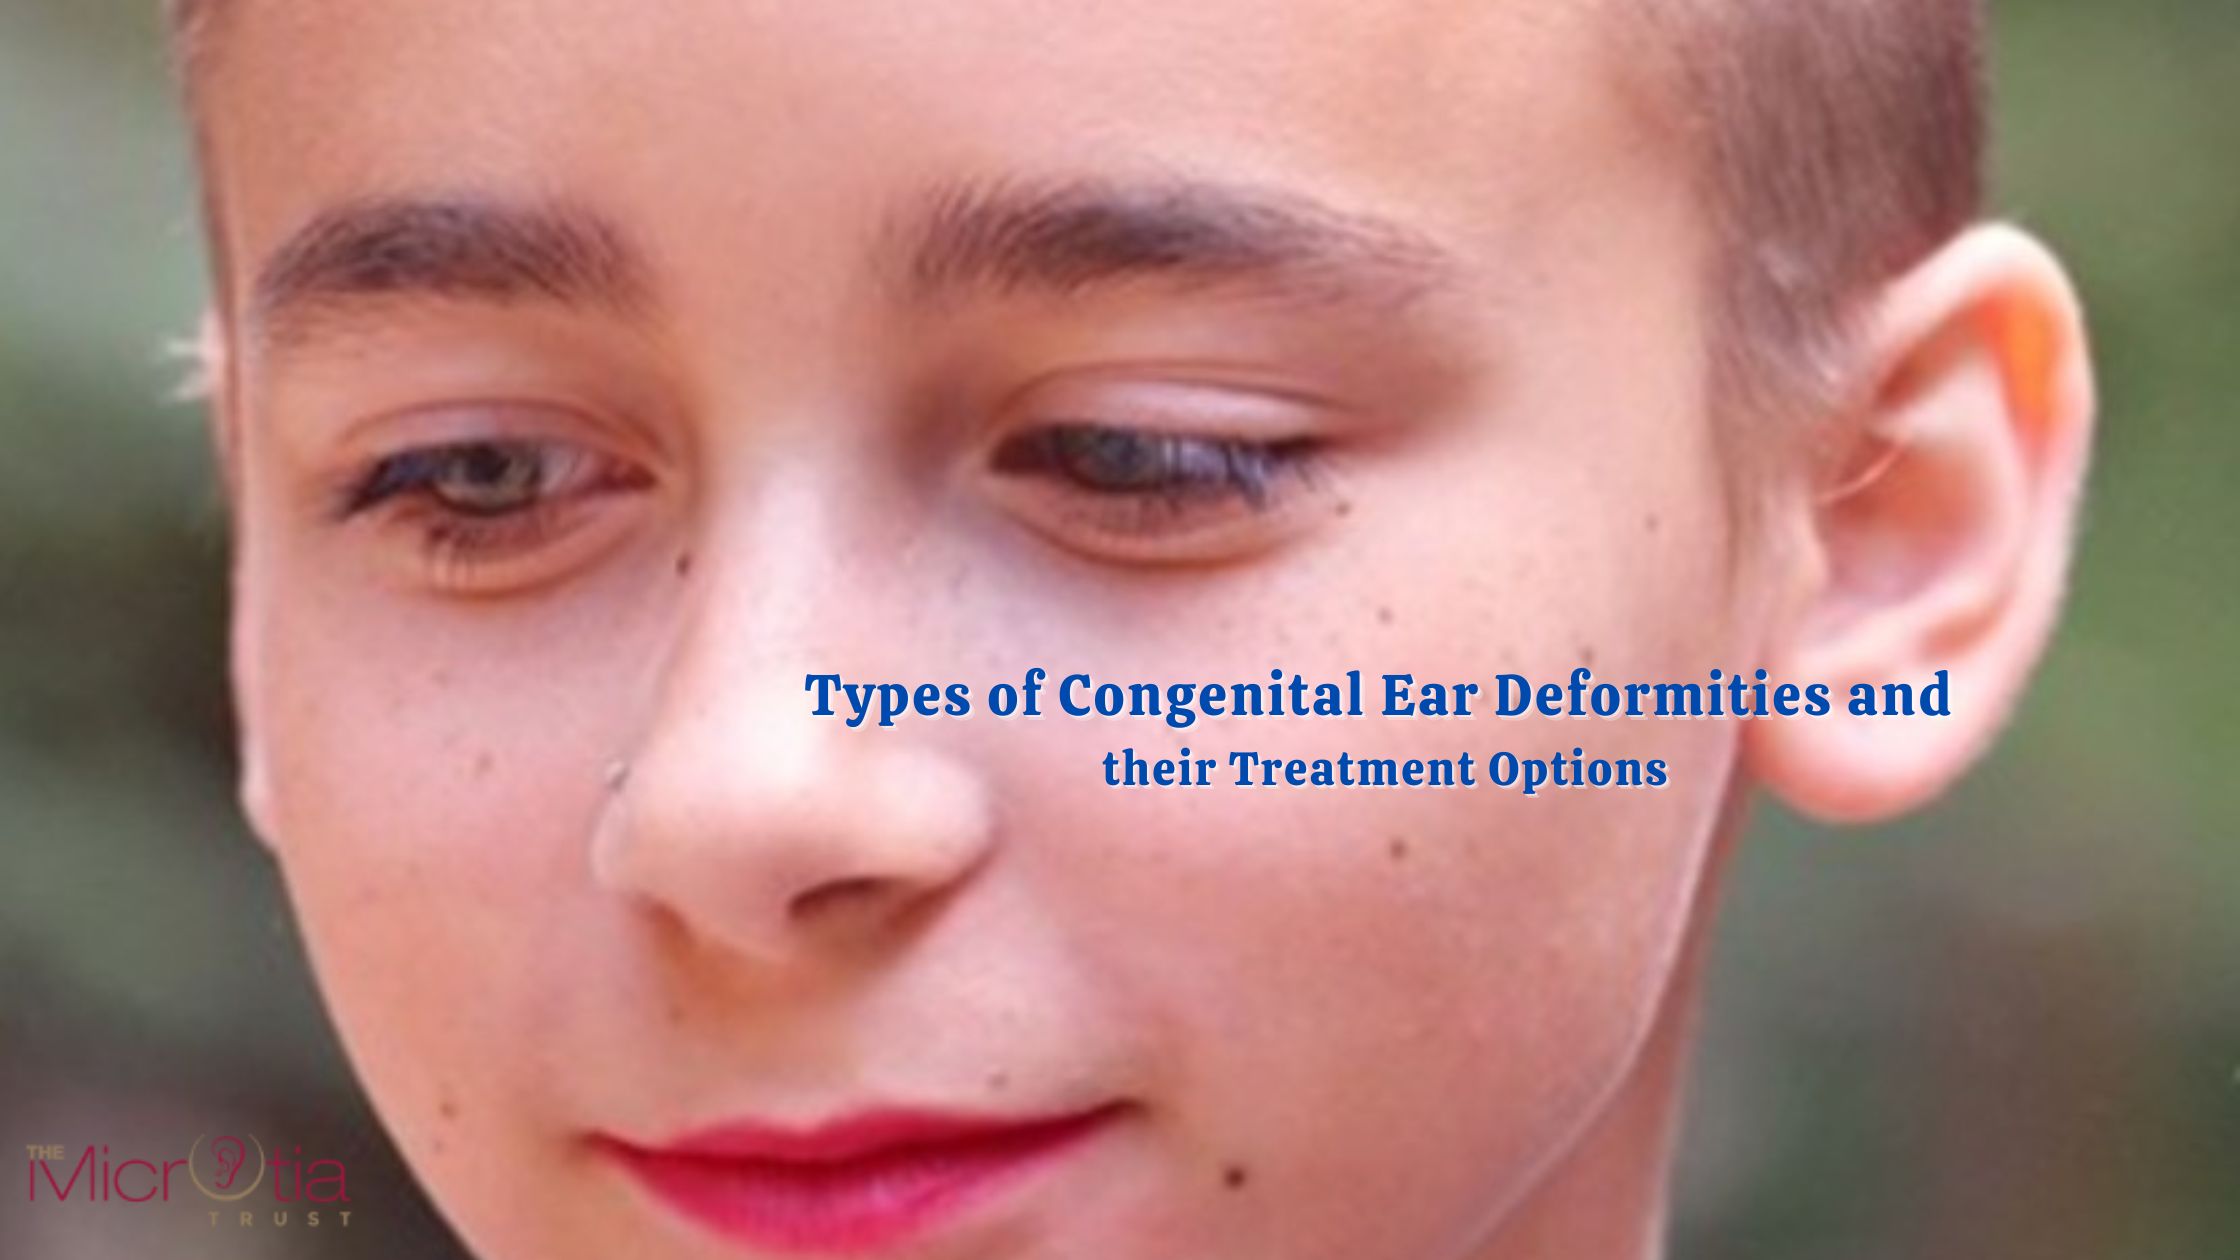 Types of Congenital Ear Deformities and their Treatment Options